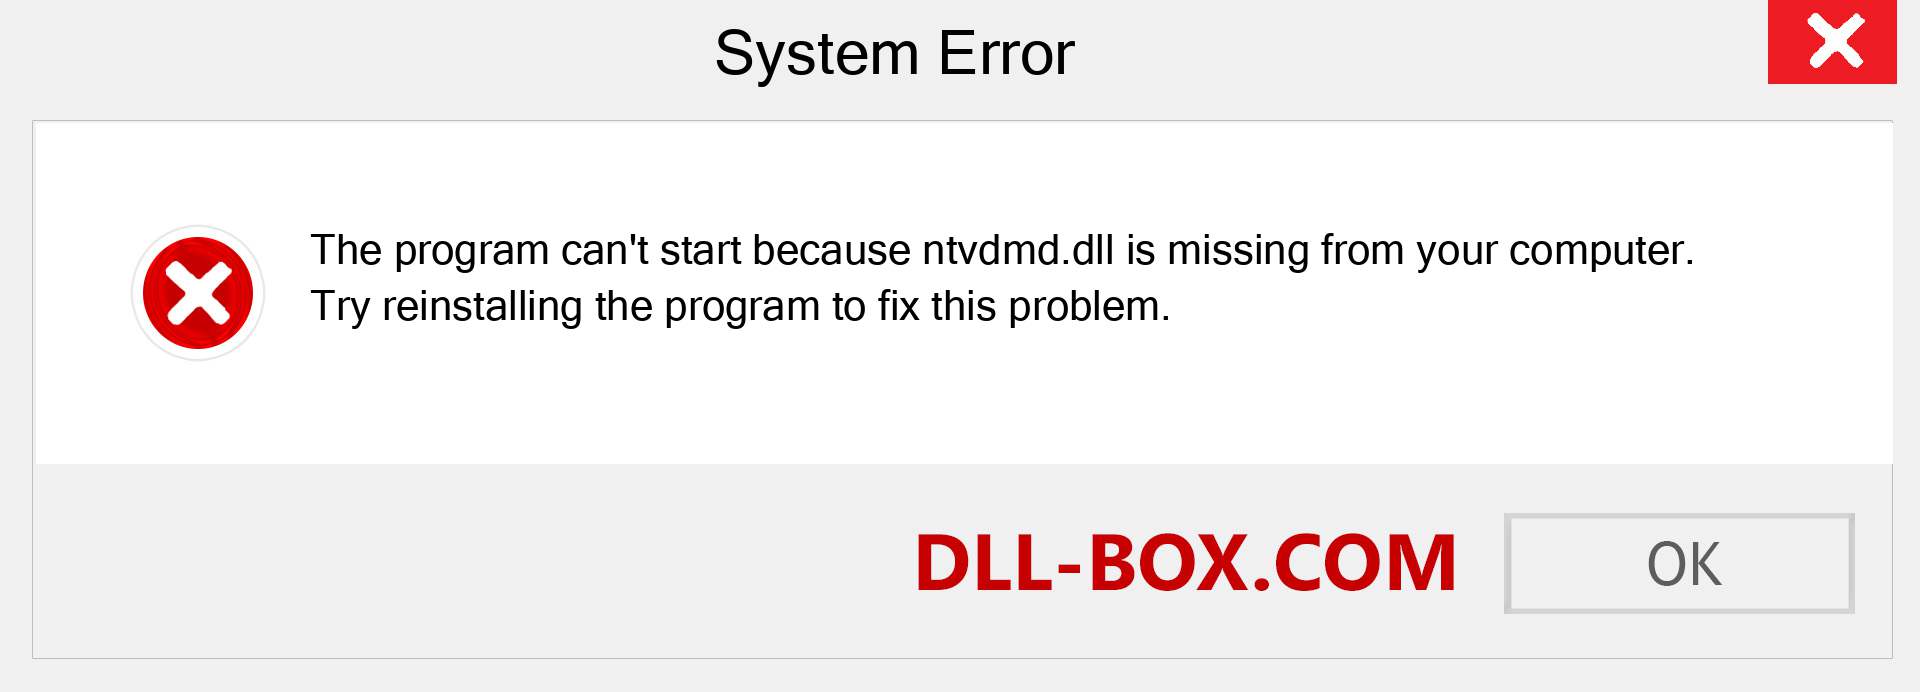  ntvdmd.dll file is missing?. Download for Windows 7, 8, 10 - Fix  ntvdmd dll Missing Error on Windows, photos, images